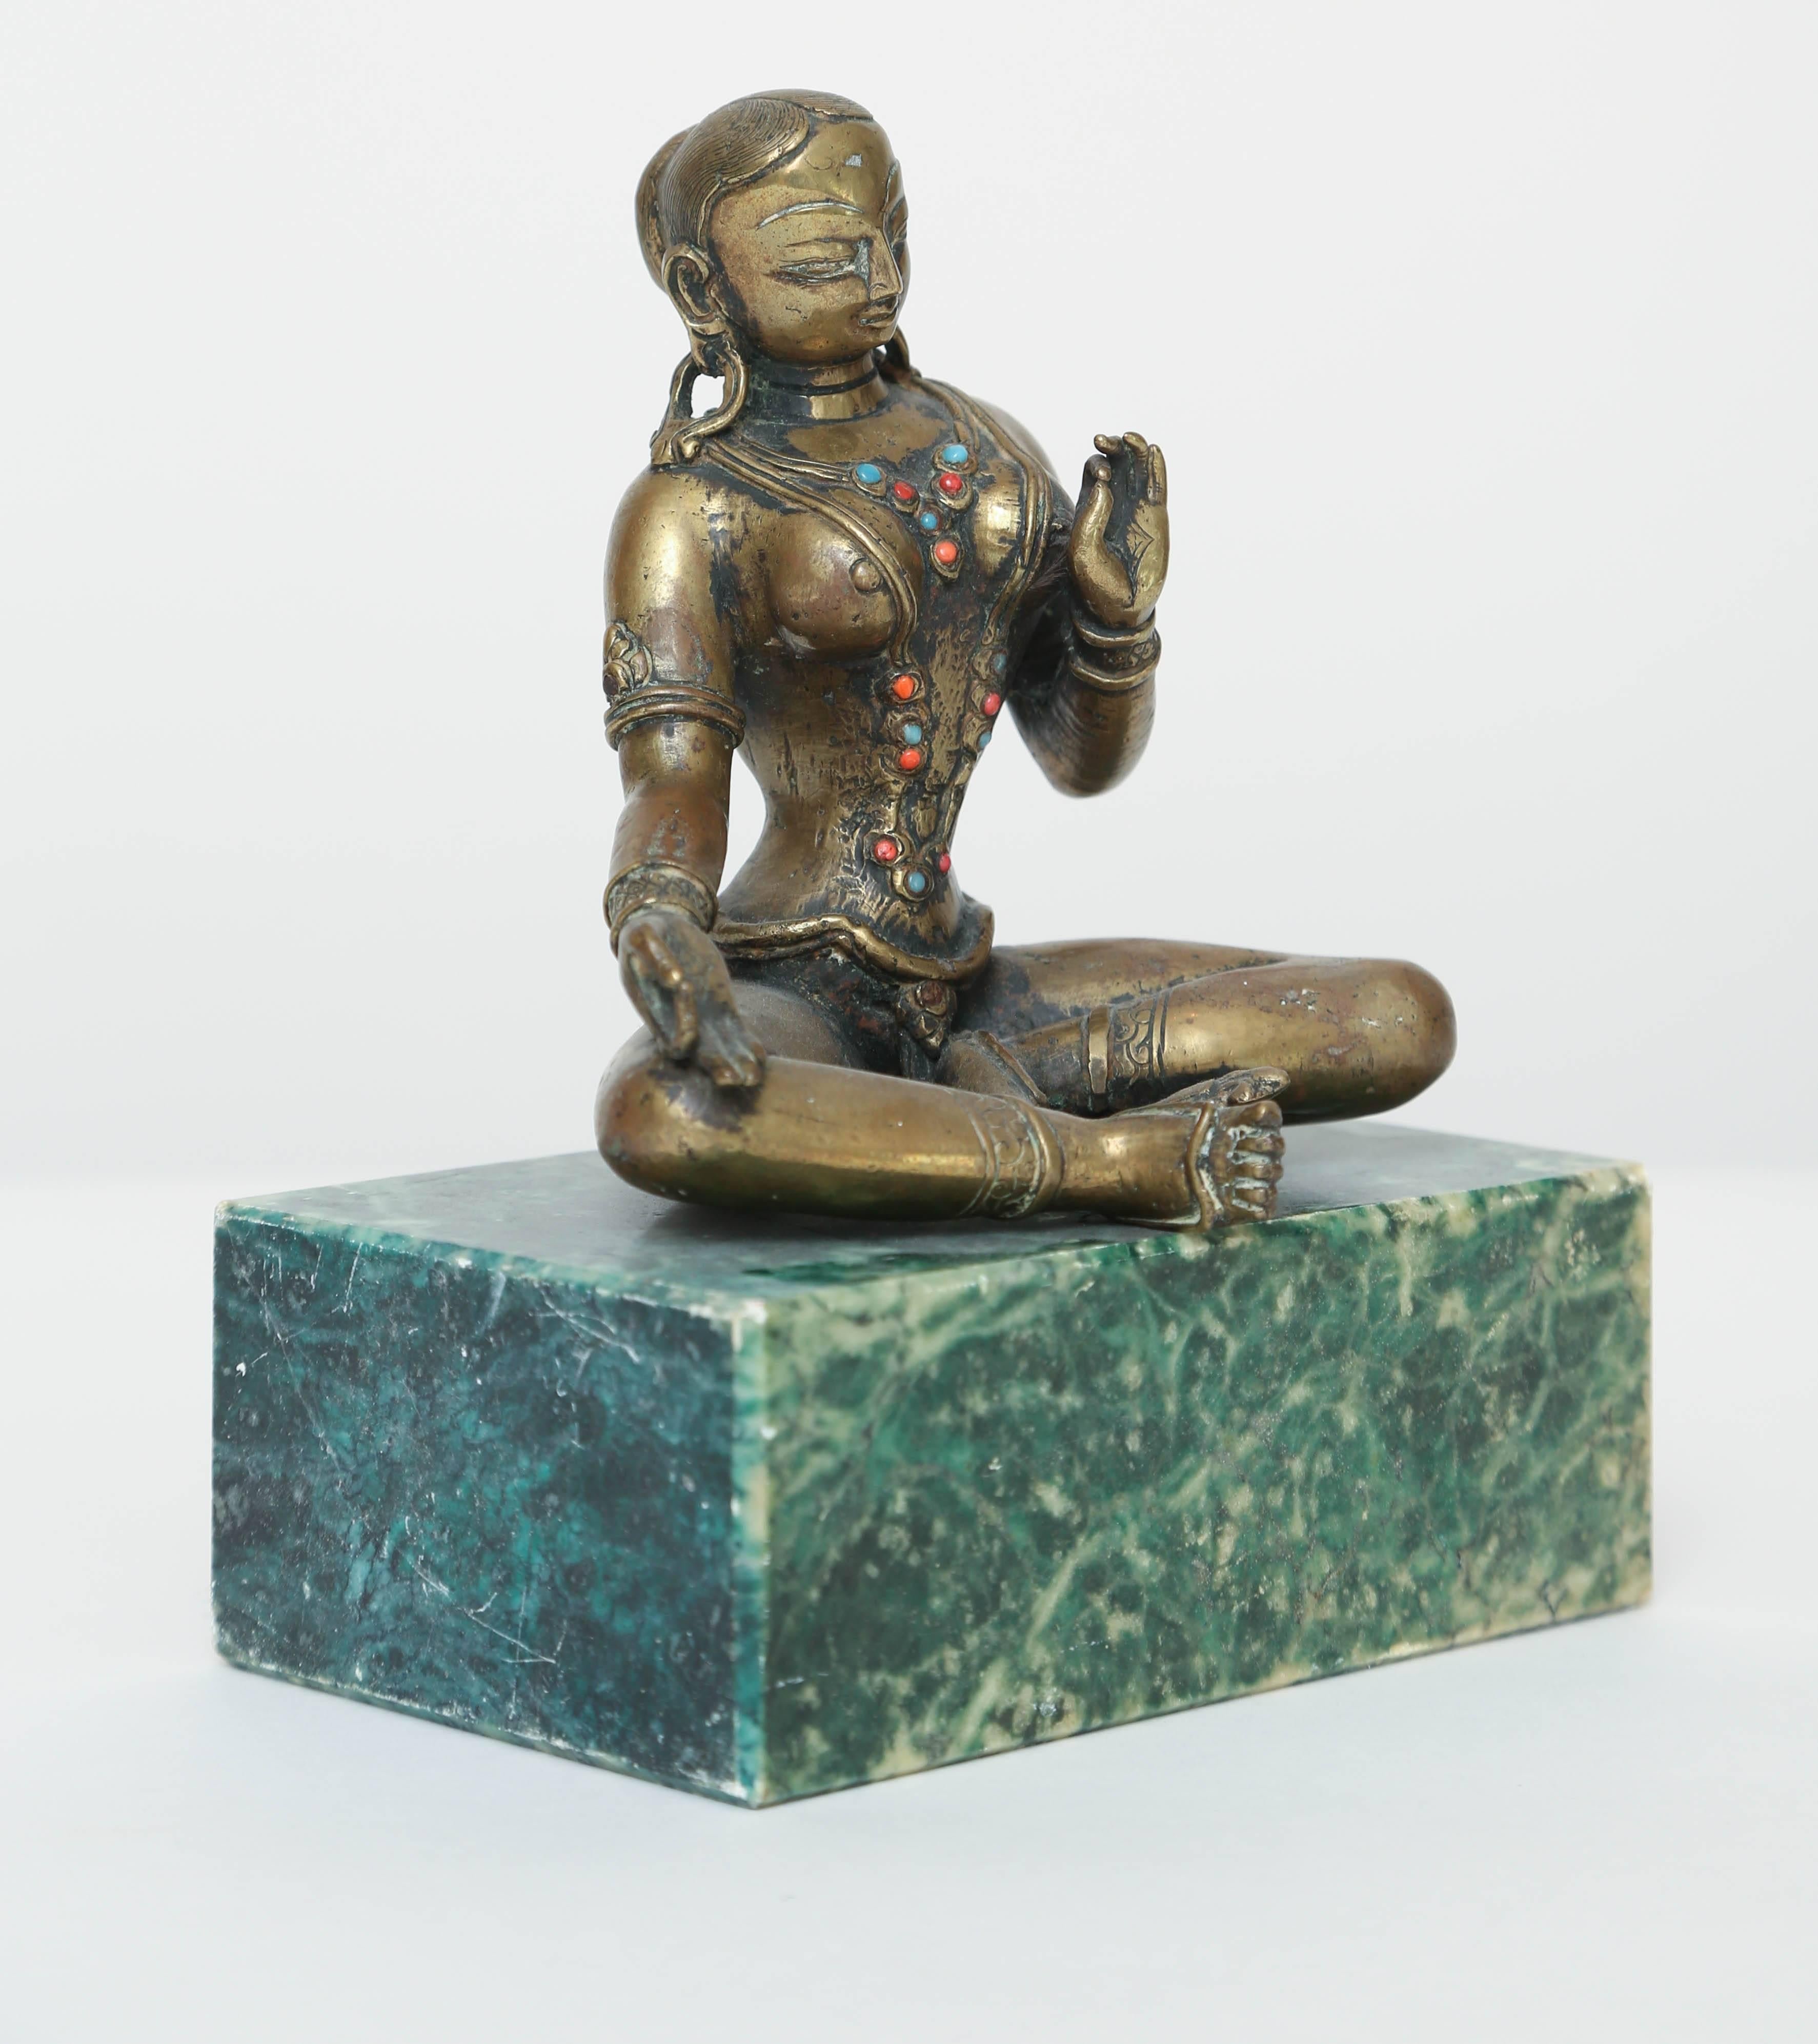 This solid cast bronze statuette depicts the Hindu goddess Tara as she sits with legs folded holding her hands in the gran mudra position which is said to bring peace, calm and spiritual progress. She is adorned with necklaces, armbands and